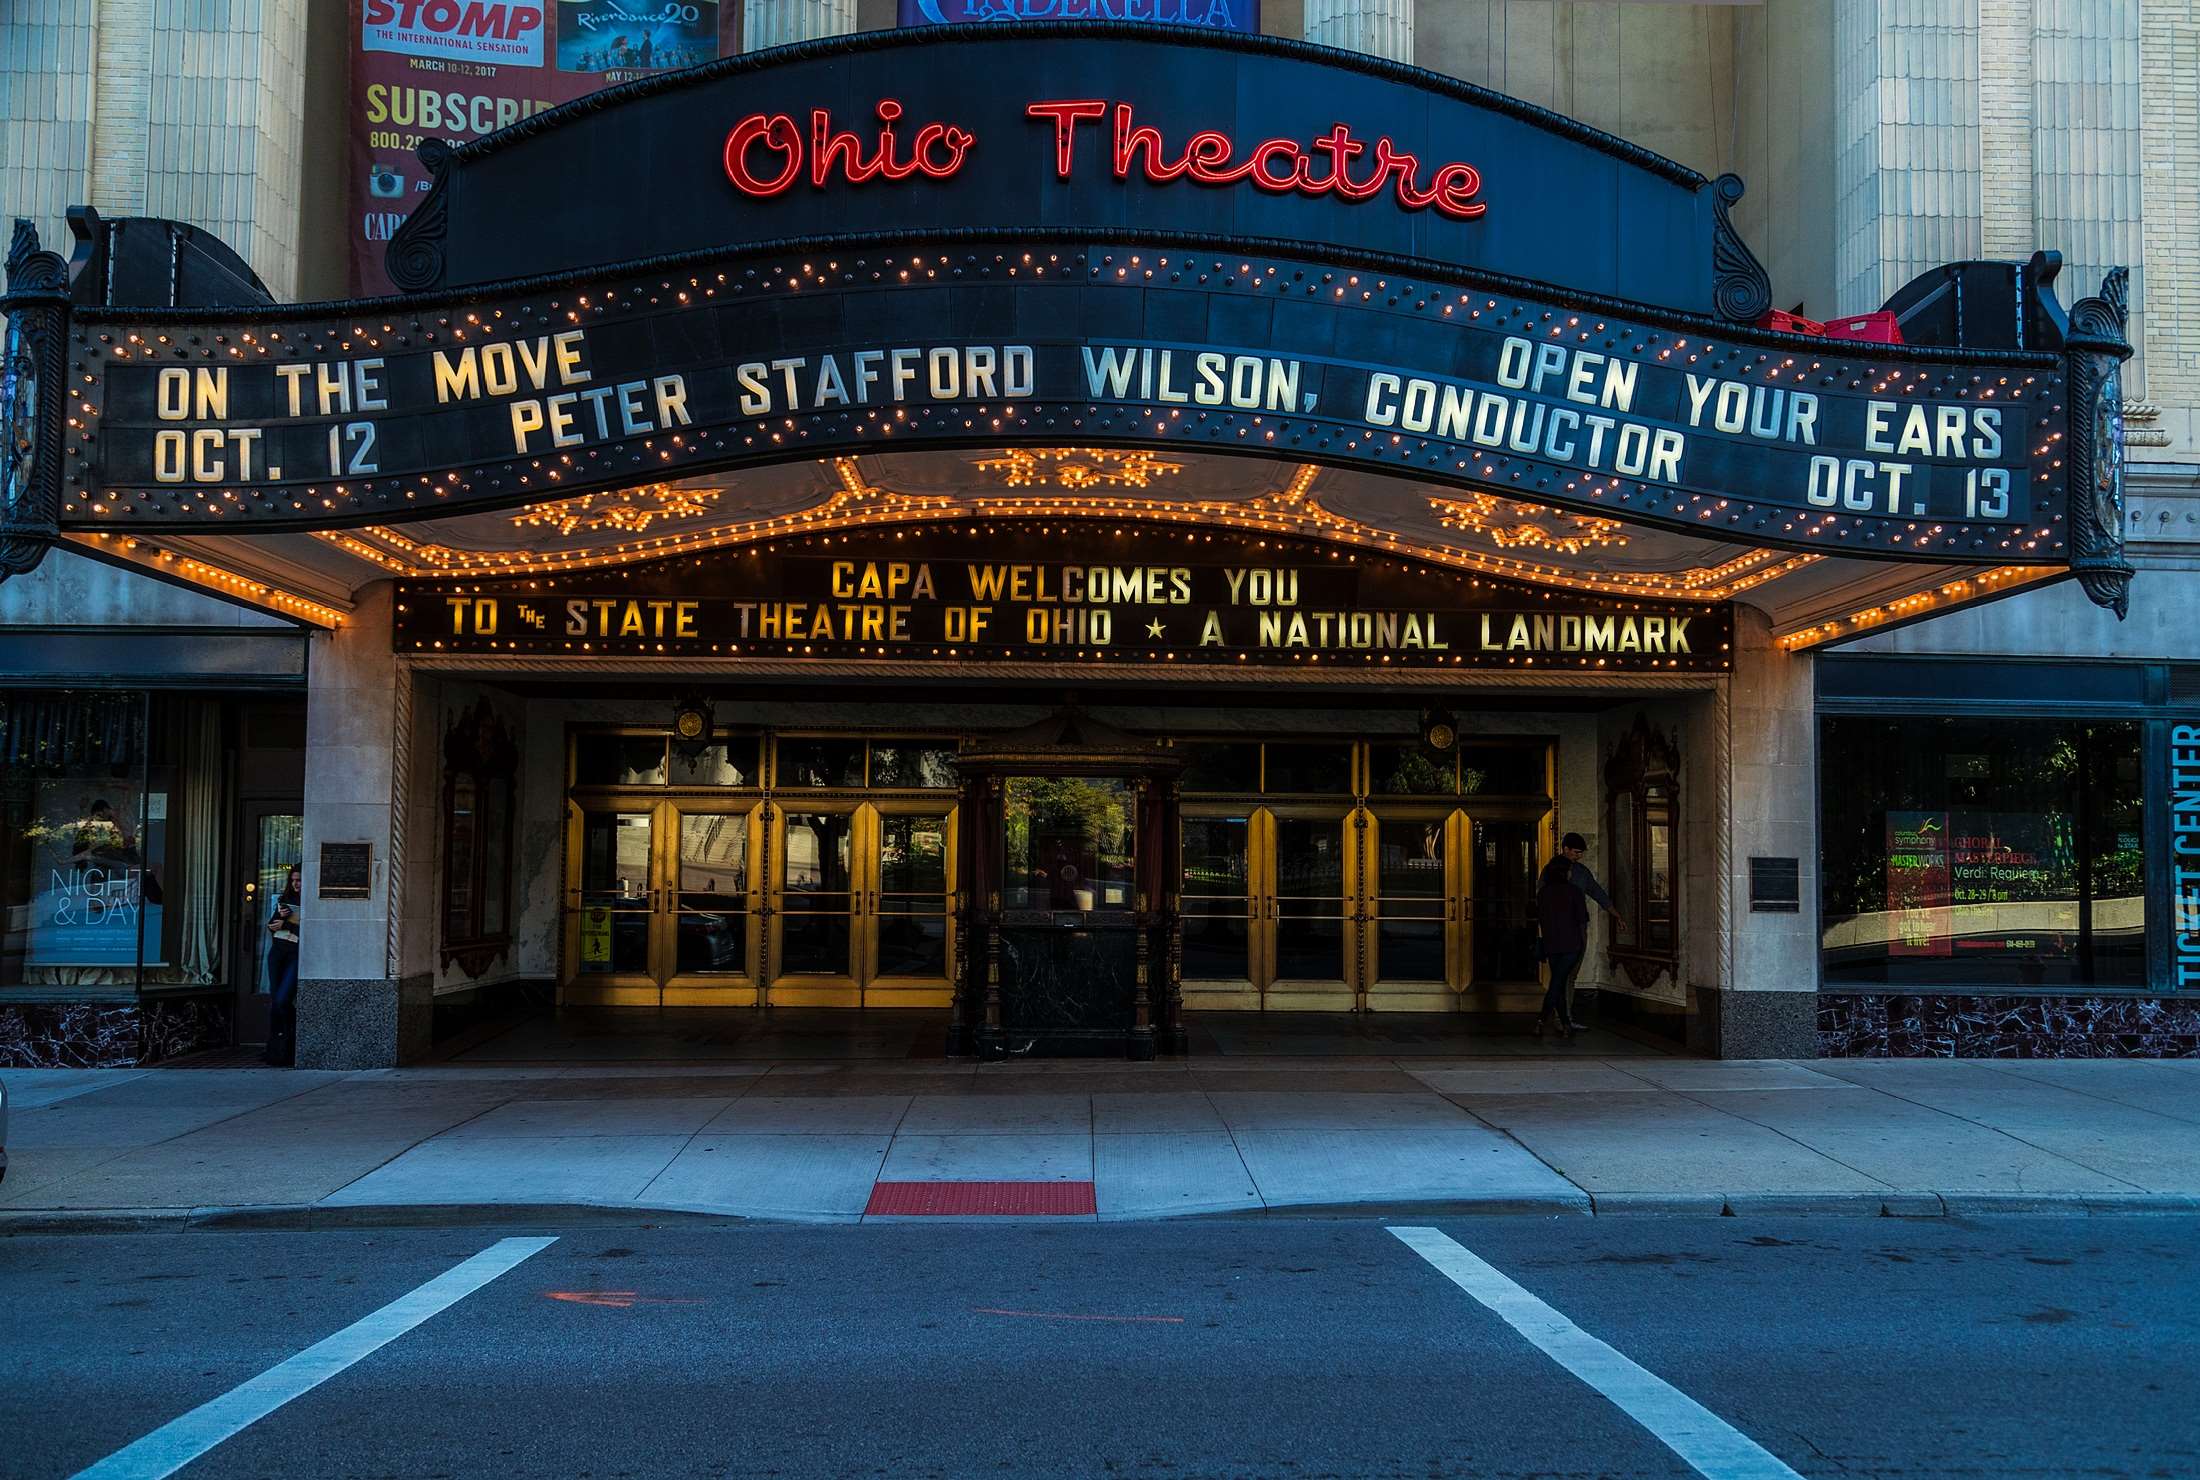 cinema, city, columbus, downtown, entertainment, entrance, front, hdr, historic, landmark, lights, marquee, movies, ohio, ohio theatre, old, theater, urban Gallery HD Wallpaper